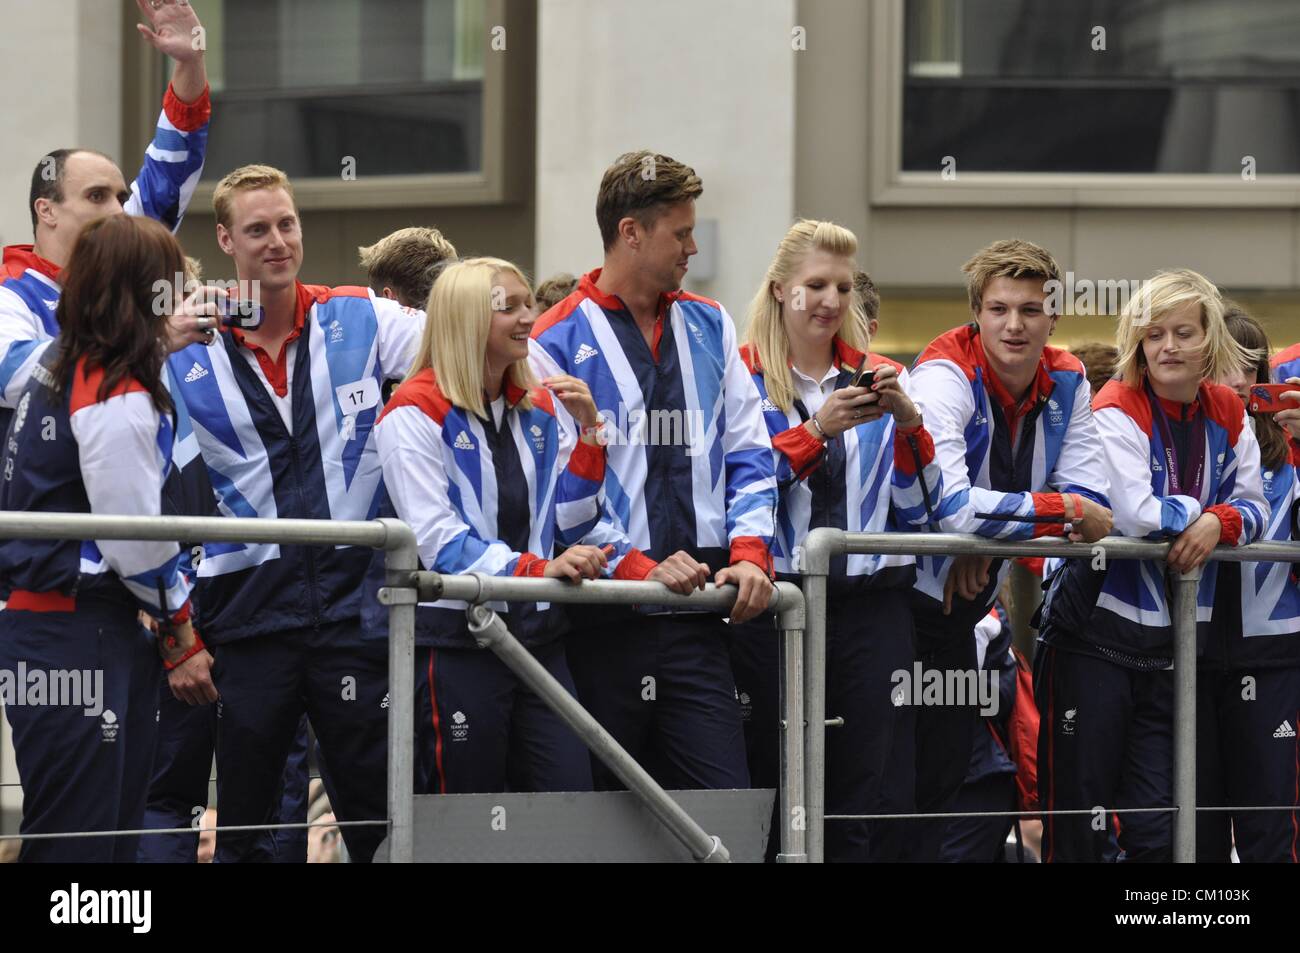 London, UK, Monday 10th September 2012. TeamGB's swimming team celebrate TeamGB's success on a procession of floats through central London, as part of the London 2012 Team GB Athletes Victory Parade. Stock Photo